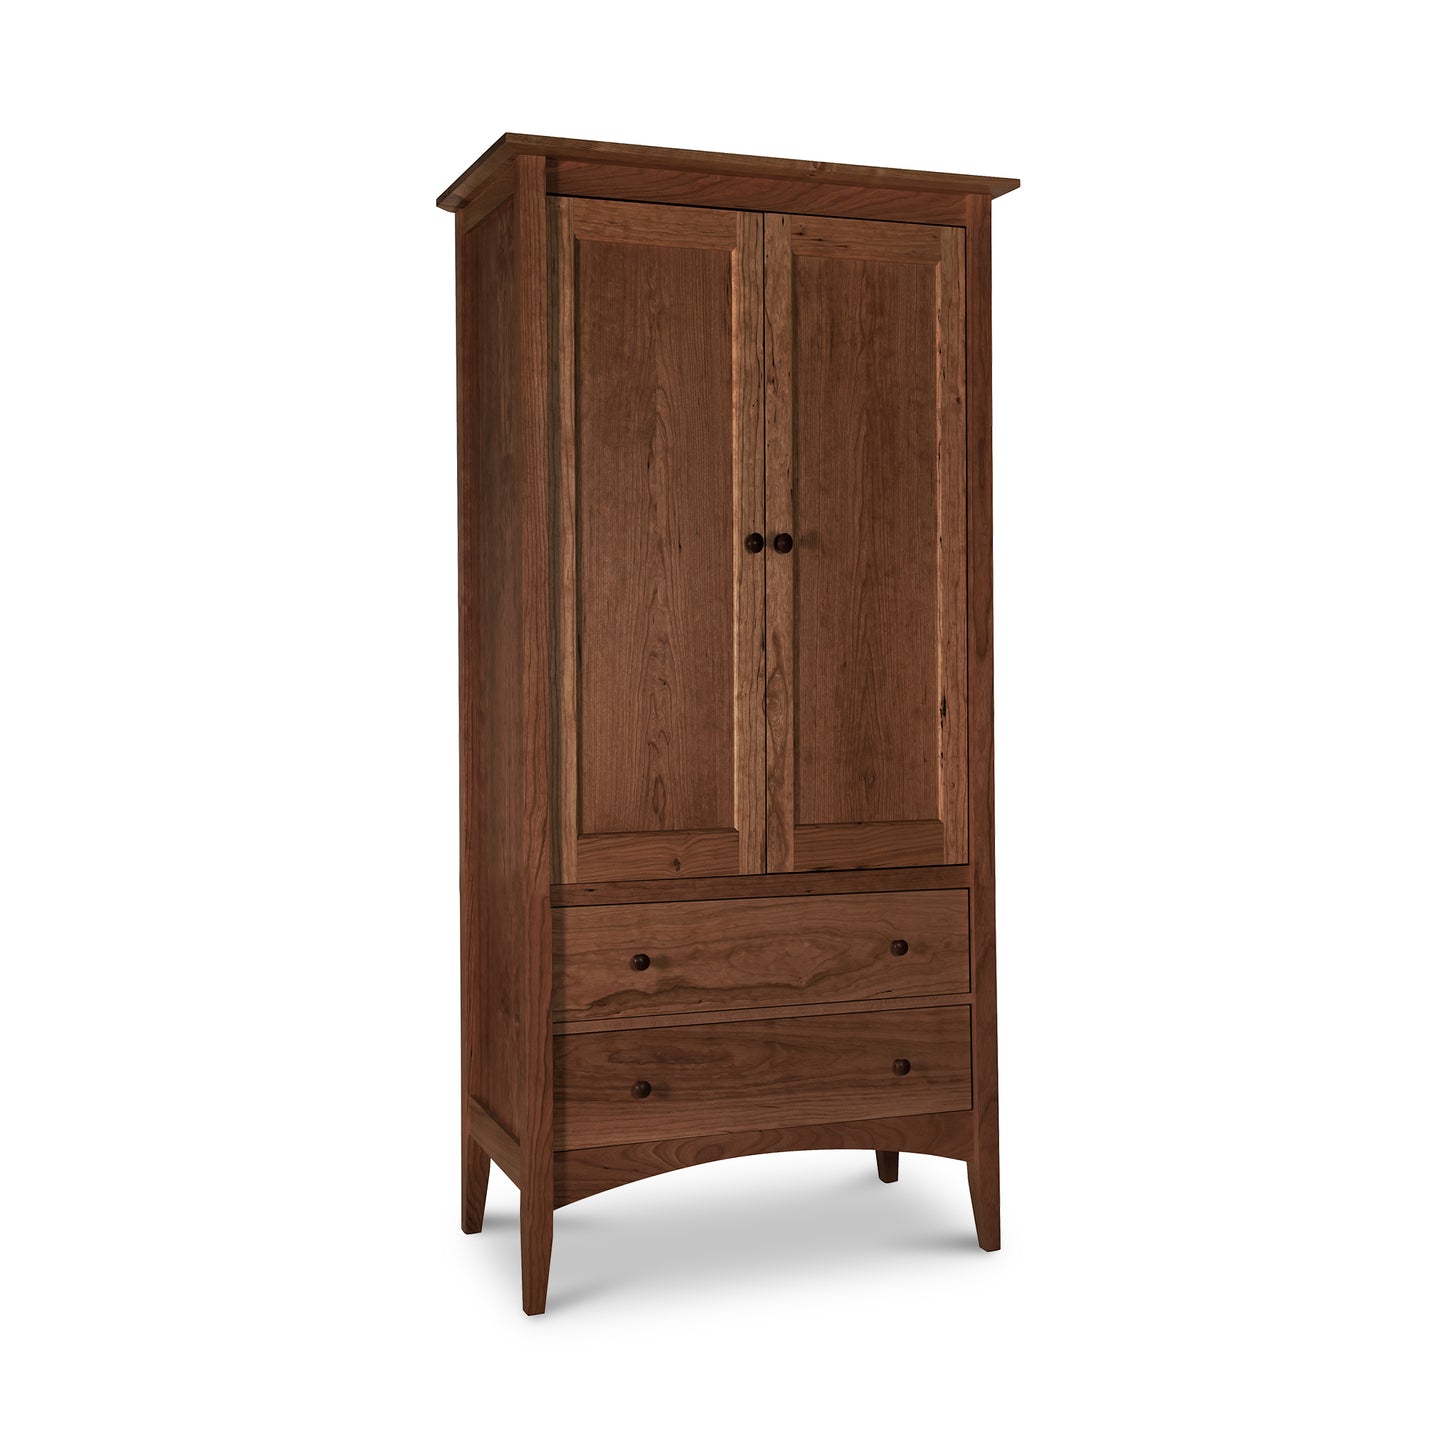 A Maple Corner Woodworks American Shaker Armoire with two doors on the upper section and a drawer at the bottom, isolated on a white background.